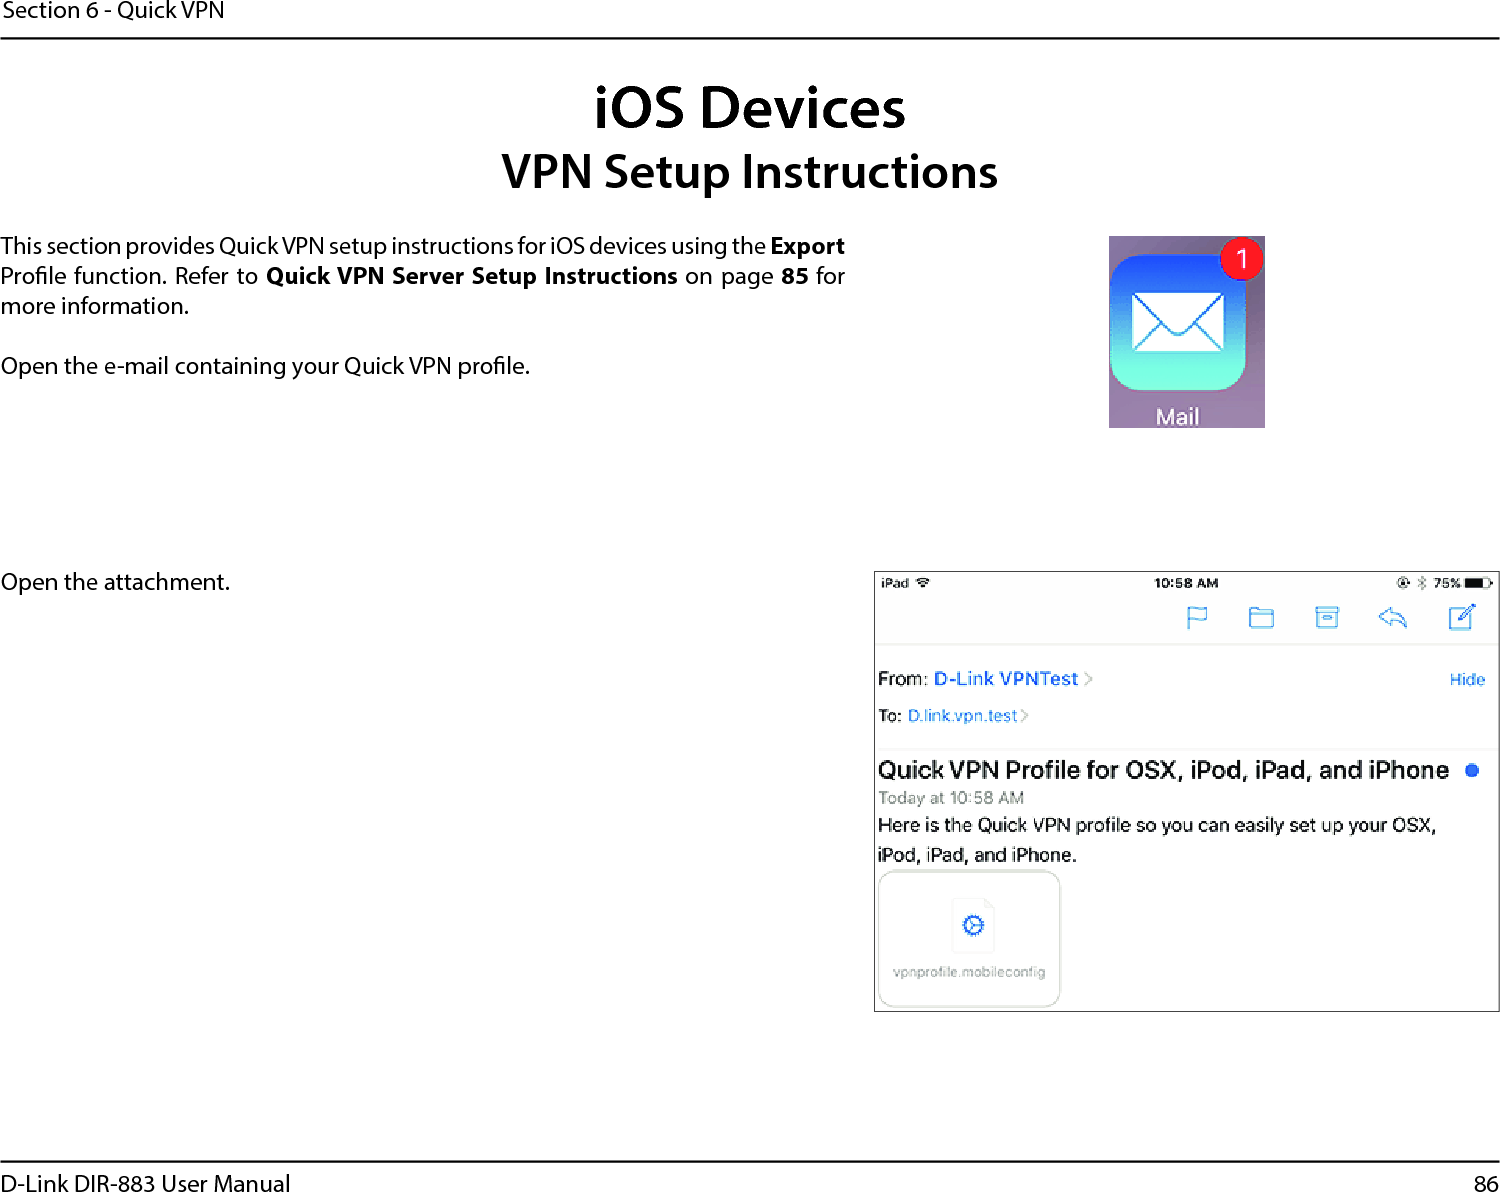 86D-Link DIR-883 User ManualSection 6 - Quick VPNiOS DevicesVPN Setup InstructionsThis section provides Quick VPN setup instructions for iOS devices using the Export Prole function. Refer to Quick VPN Server Setup Instructions on page 85 for more information.Open the e-mail containing your Quick VPN prole.Open the attachment. 